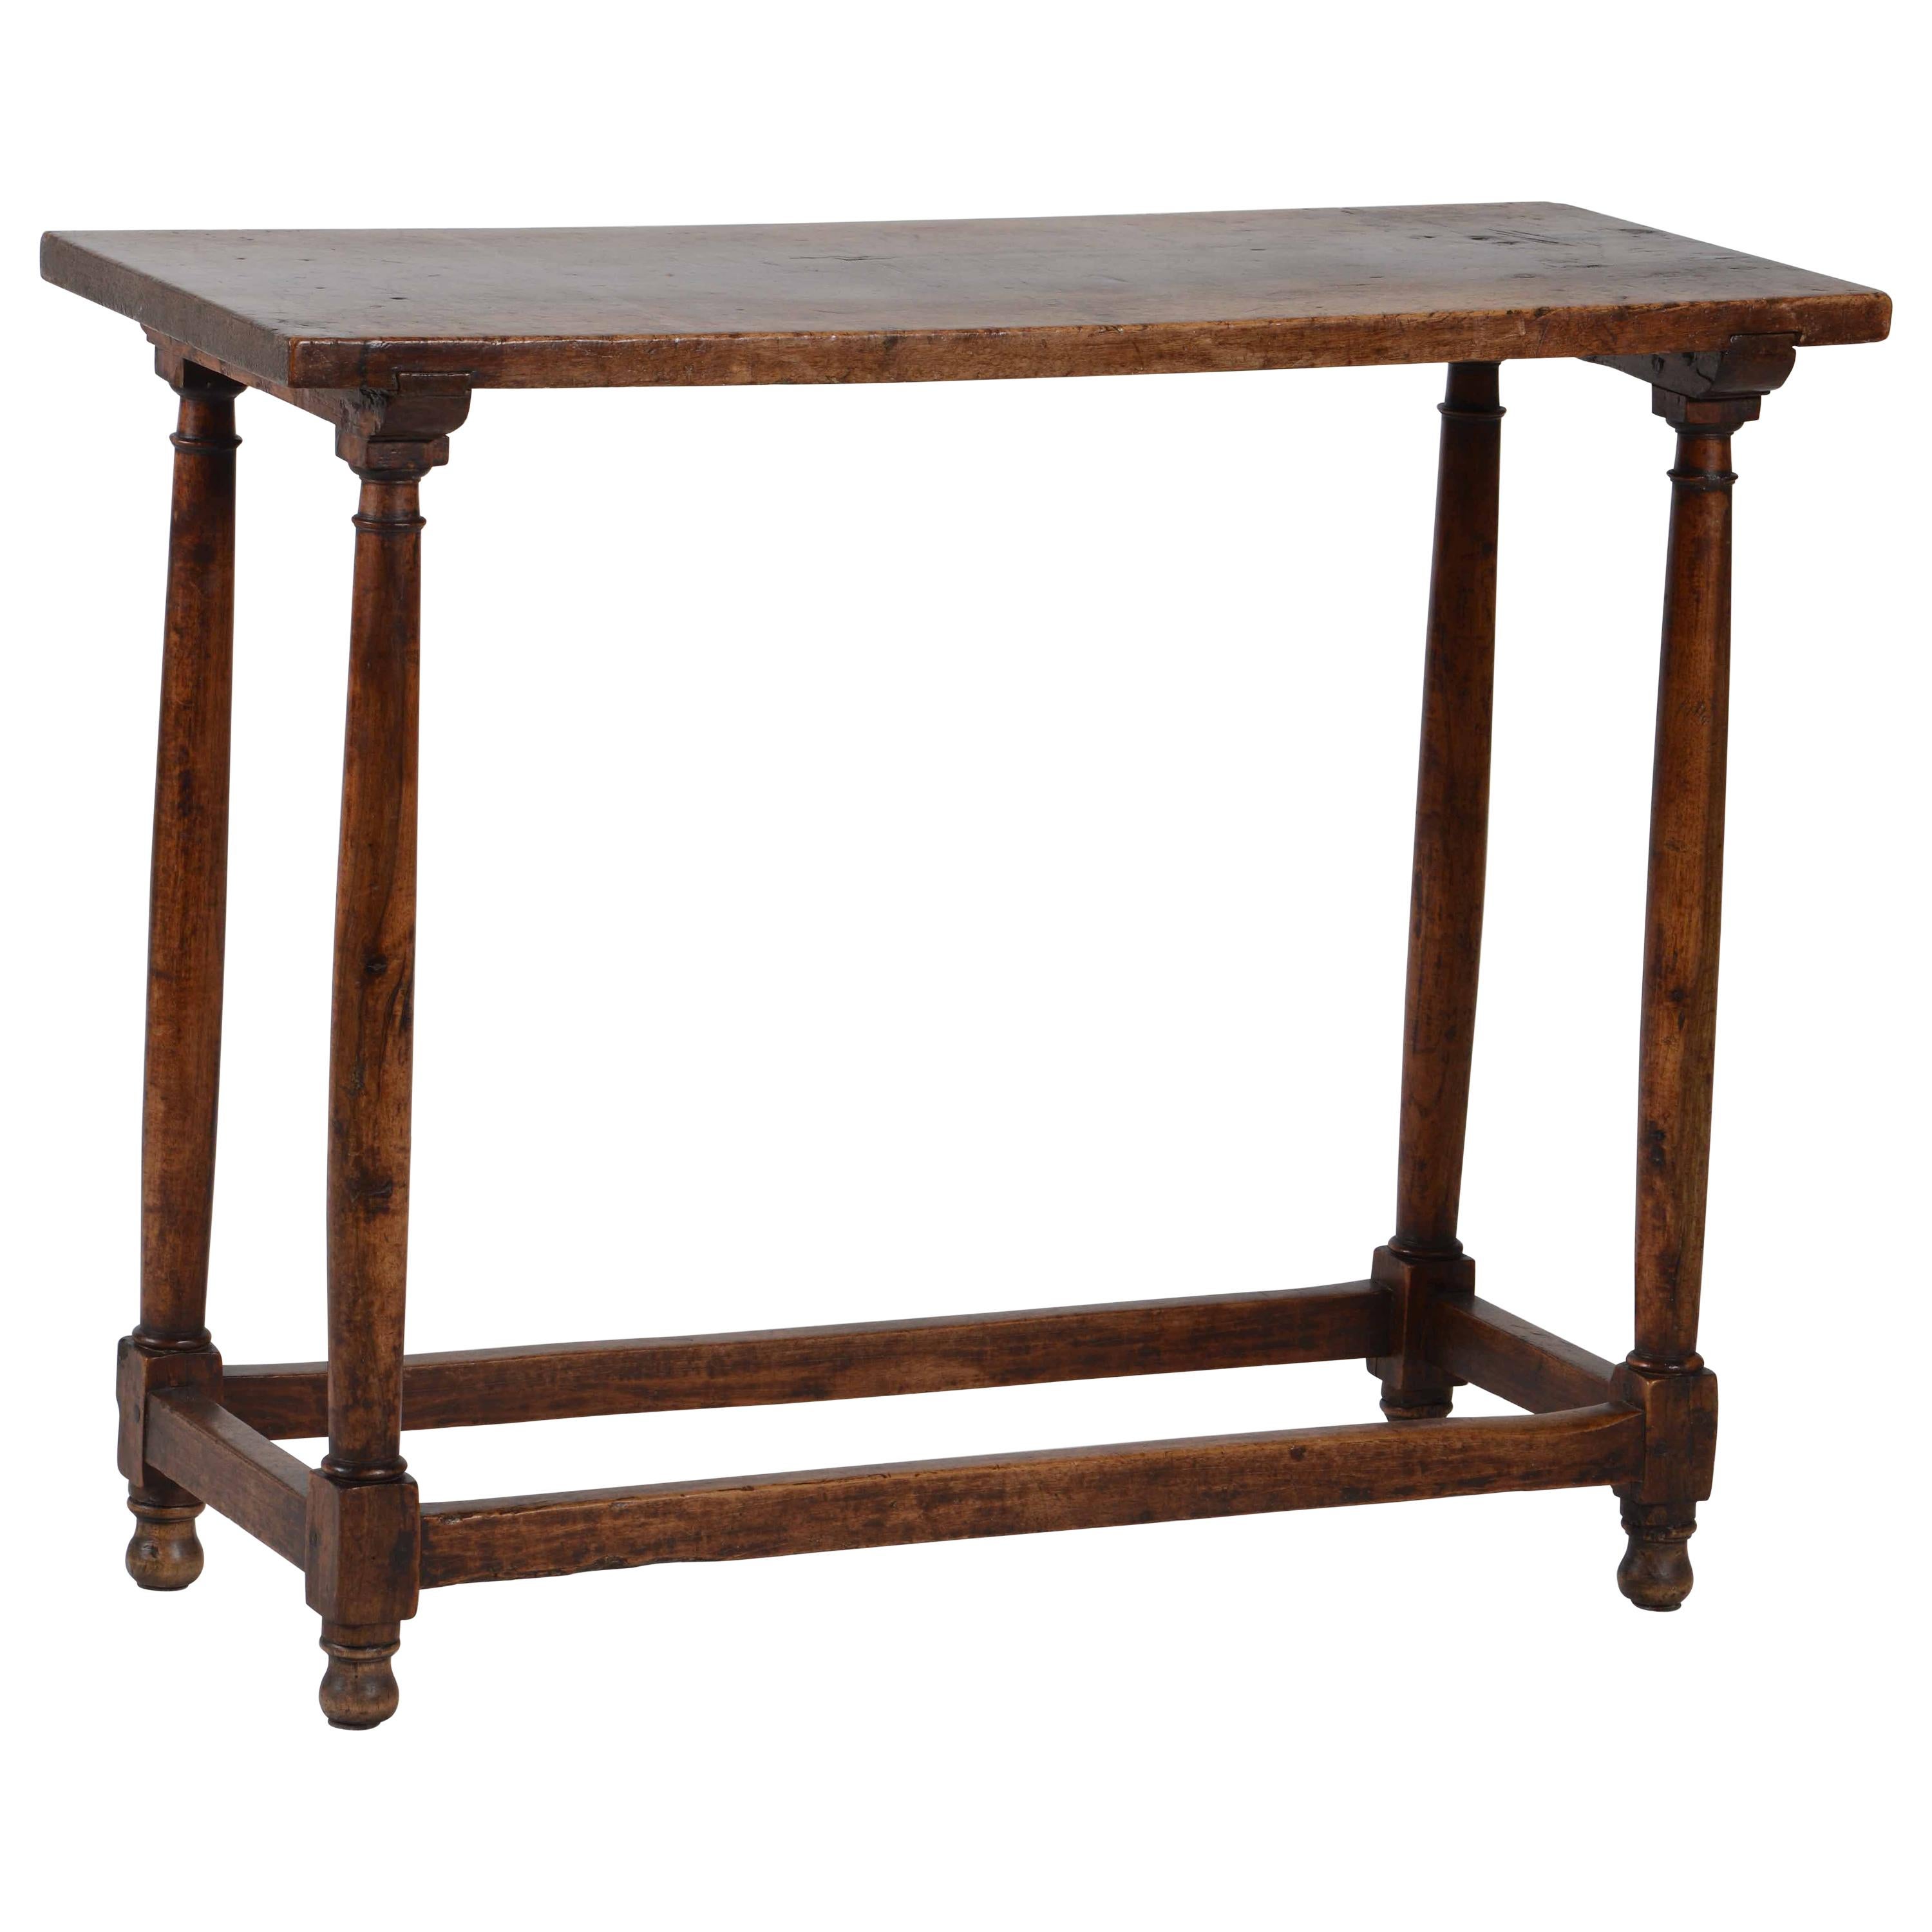 Minimal 17th Century Small Console Table in Walnut